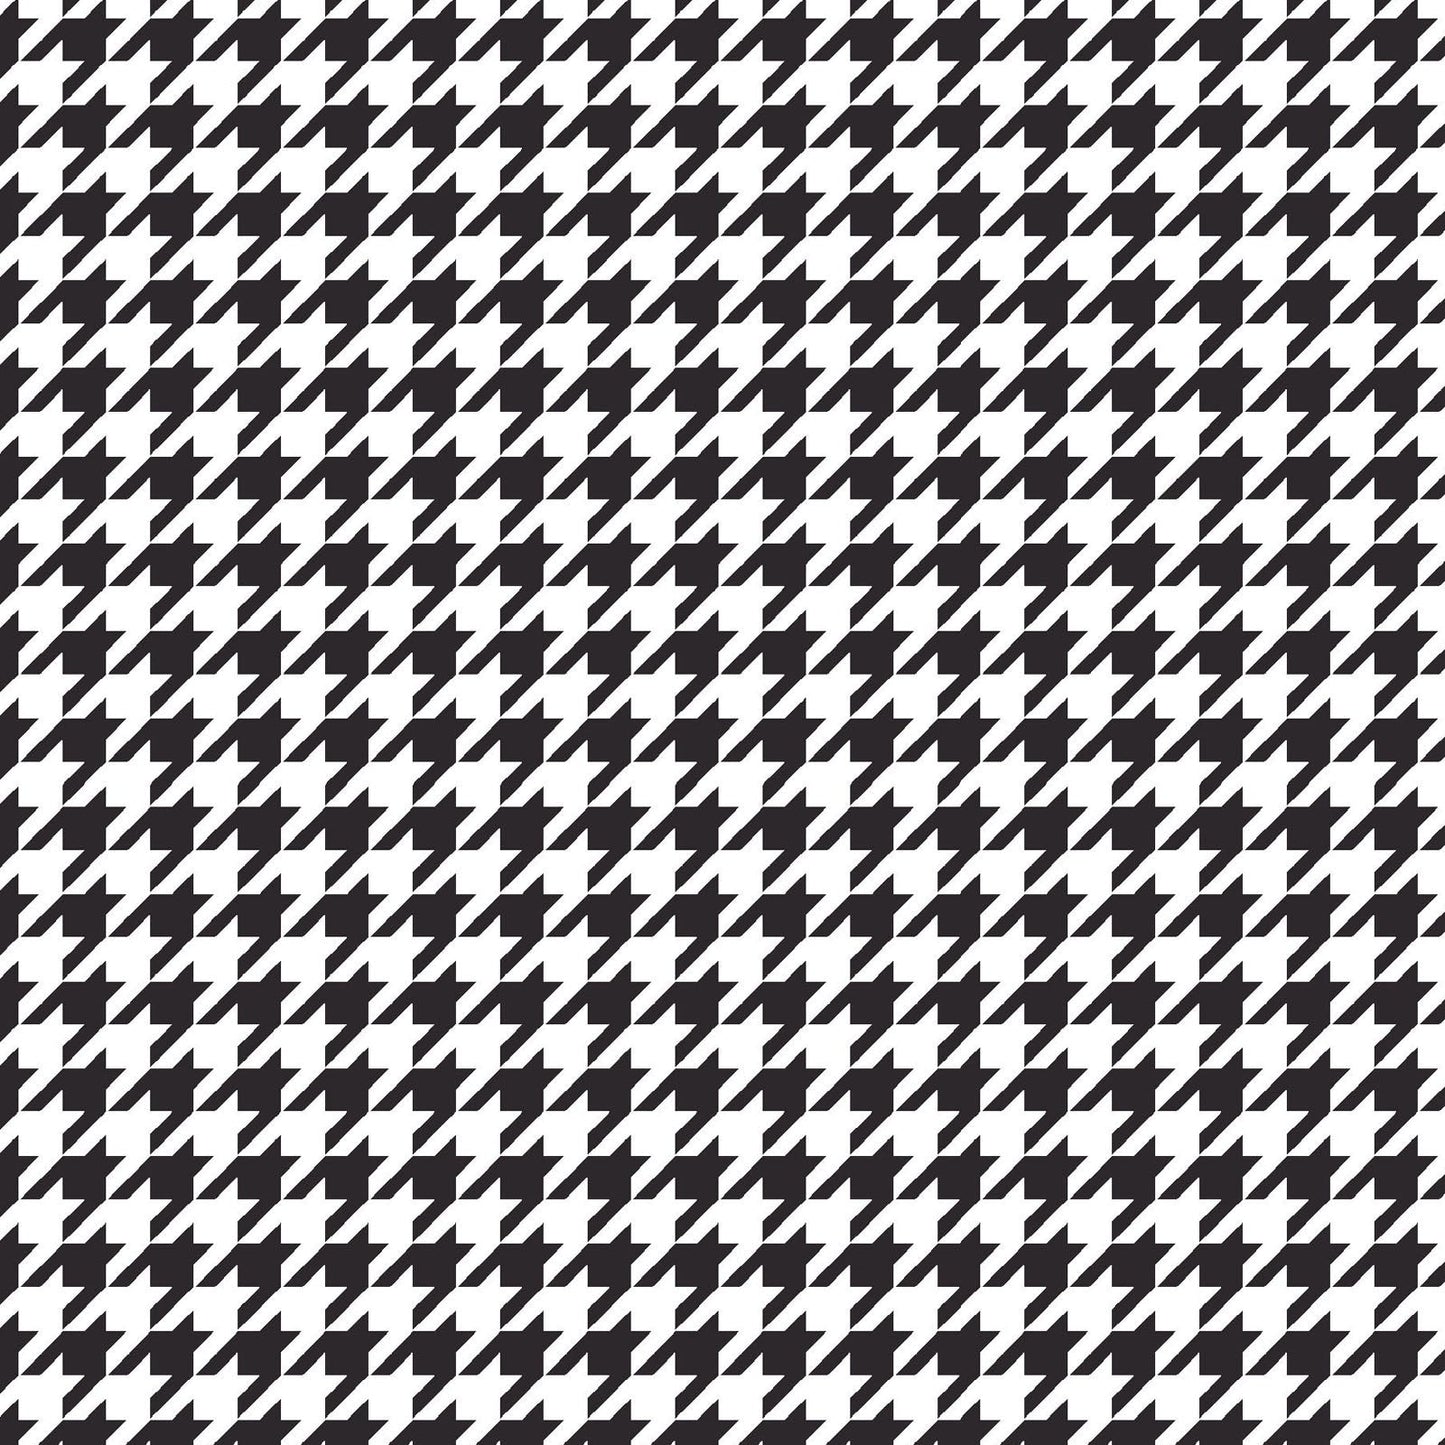 Black on White Houndstooth (MAS8206-J) from the Kimberbell Basics line designed by Kim Christopherson for Maywood Studio. This fabric features a small black houndstooth print on a white background and is a fantastic choice for adding texture and color to a quilt.